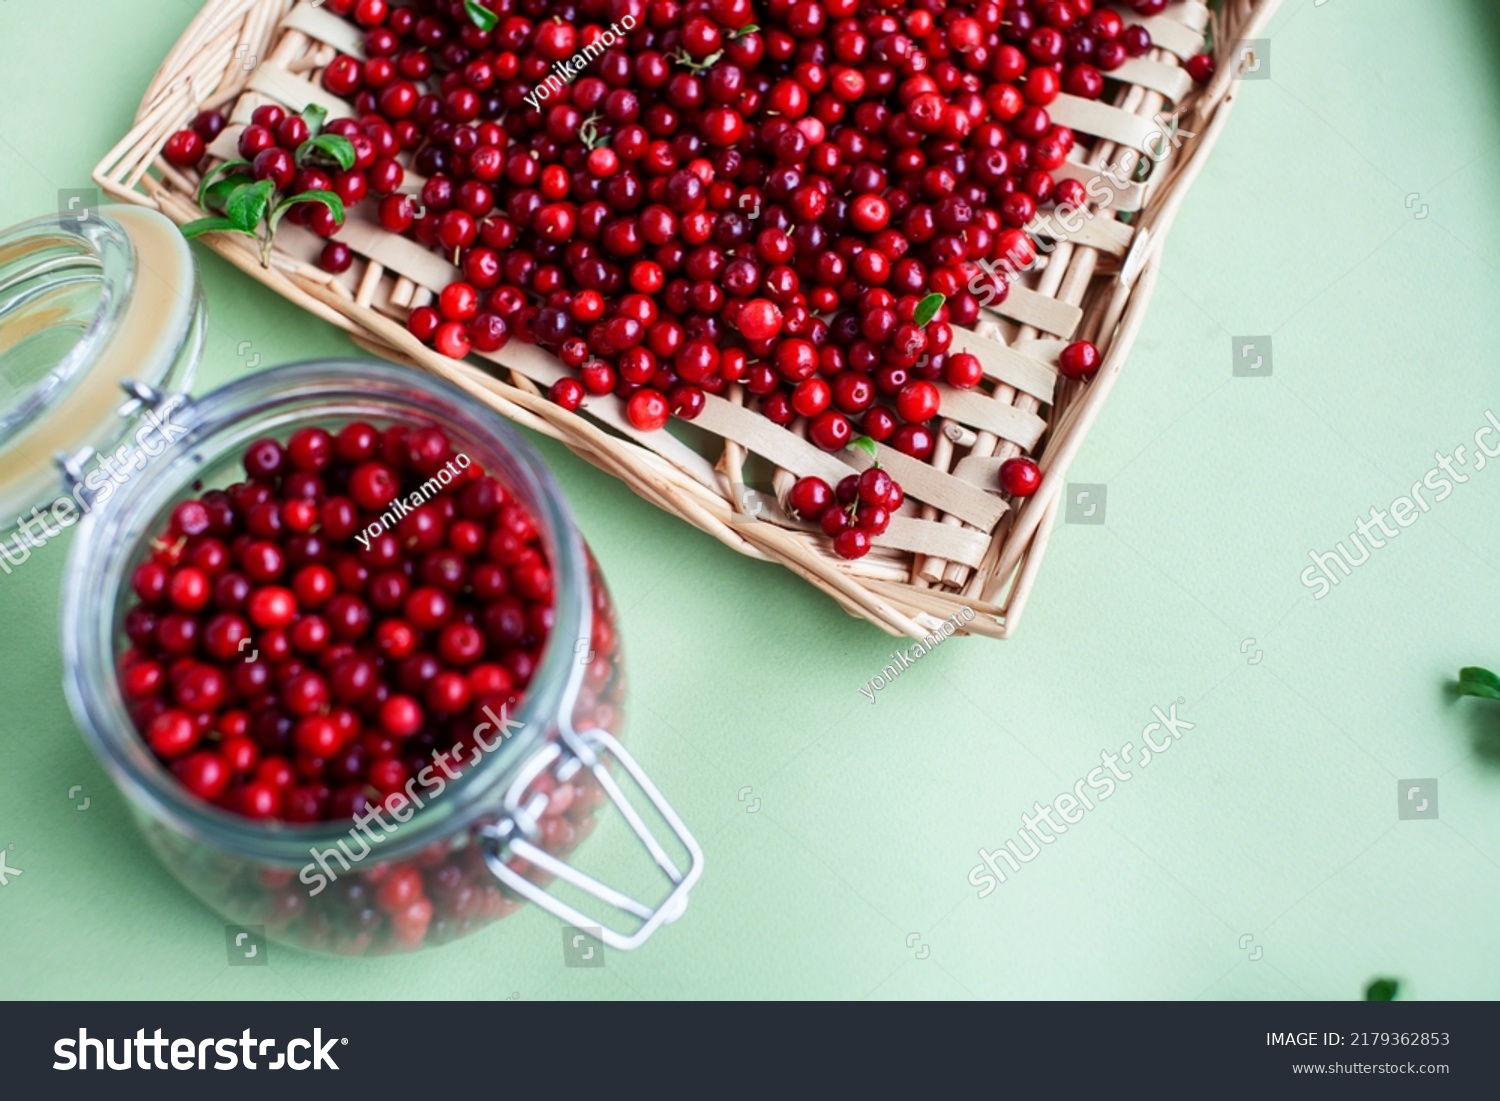 autumn berries on table, lingonberry raw closeup #2179362853